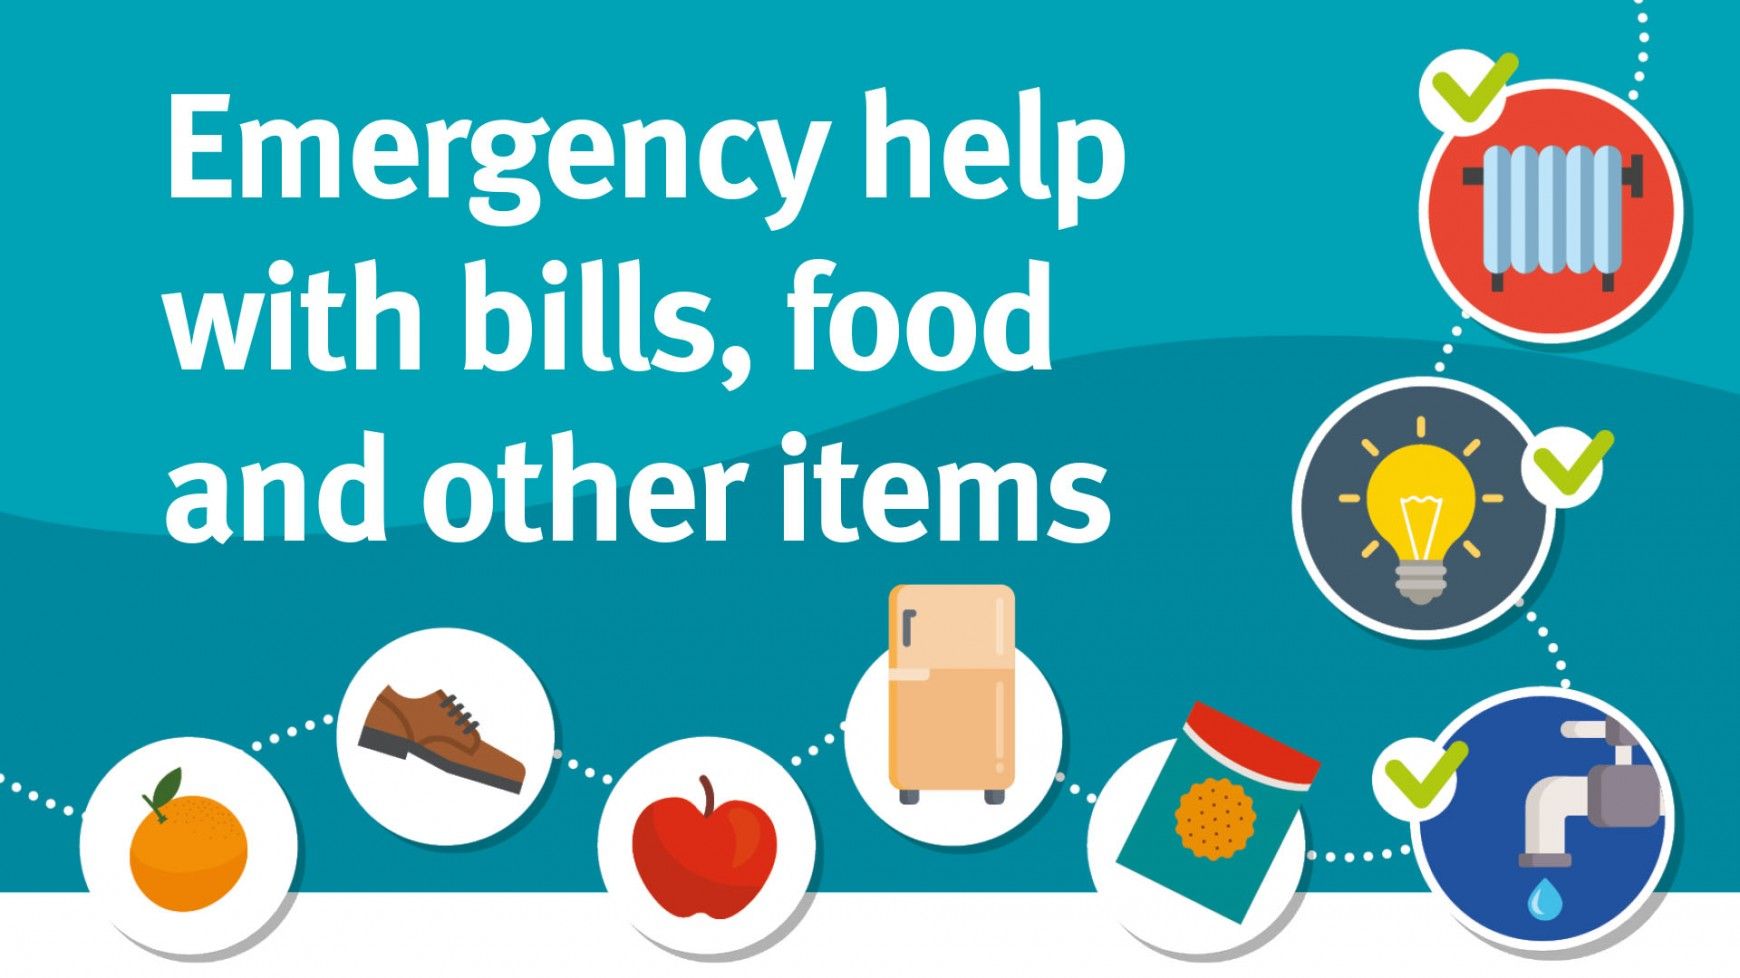 Emergency help with bills, food and other items